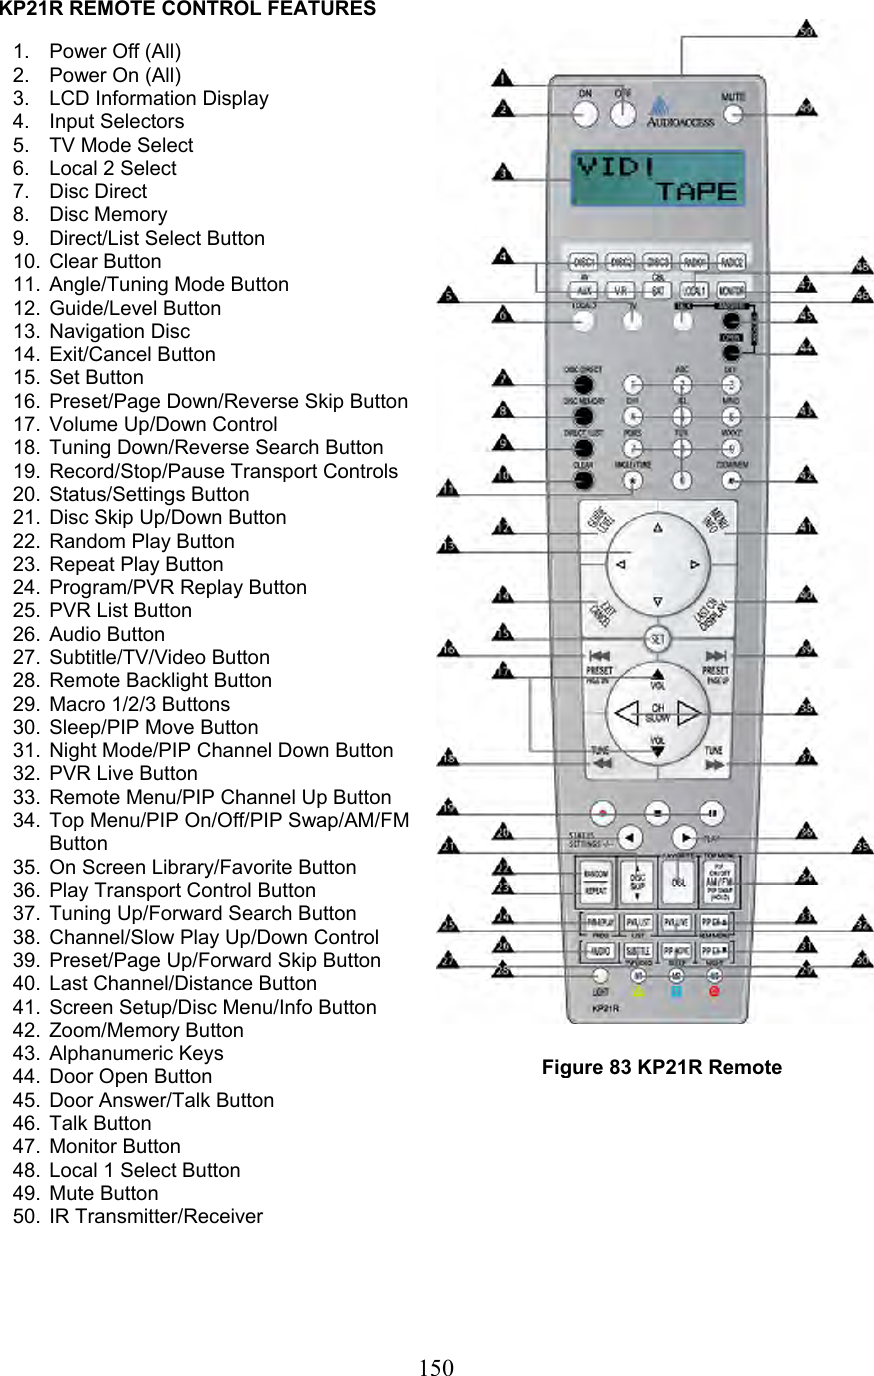  150KP21R REMOTE CONTROL FEATURES              1.  Power Off (All) 2.  Power On (All) 3.  LCD Information Display 4. Input Selectors 5. TV Mode Select 6.  Local 2 Select 7. Disc Direct 8. Disc Memory 9. Direct/List Select Button 10. Clear Button 11.  Angle/Tuning Mode Button 12. Guide/Level Button 13. Navigation Disc 14. Exit/Cancel Button 15. Set Button 16.  Preset/Page Down/Reverse Skip Button 17.  Volume Up/Down Control 18.  Tuning Down/Reverse Search Button 19. Record/Stop/Pause Transport Controls 20. Status/Settings Button 21.  Disc Skip Up/Down Button 22. Random Play Button 23.  Repeat Play Button 24.  Program/PVR Replay Button 25.  PVR List Button 26. Audio Button 27. Subtitle/TV/Video Button 28.  Remote Backlight Button 29. Macro 1/2/3 Buttons 30.  Sleep/PIP Move Button 31. Night Mode/PIP Channel Down Button 32.  PVR Live Button 33.  Remote Menu/PIP Channel Up Button 34.  Top Menu/PIP On/Off/PIP Swap/AM/FM Button 35.  On Screen Library/Favorite Button 36.  Play Transport Control Button 37.  Tuning Up/Forward Search Button 38.  Channel/Slow Play Up/Down Control 39.  Preset/Page Up/Forward Skip Button 40. Last Channel/Distance Button 41.  Screen Setup/Disc Menu/Info Button 42. Zoom/Memory Button 43. Alphanumeric Keys 44.  Door Open Button 45.  Door Answer/Talk Button 46. Talk Button 47. Monitor Button 48.  Local 1 Select Button 49. Mute Button 50. IR Transmitter/Receiver Figure 83 KP21R Remote 